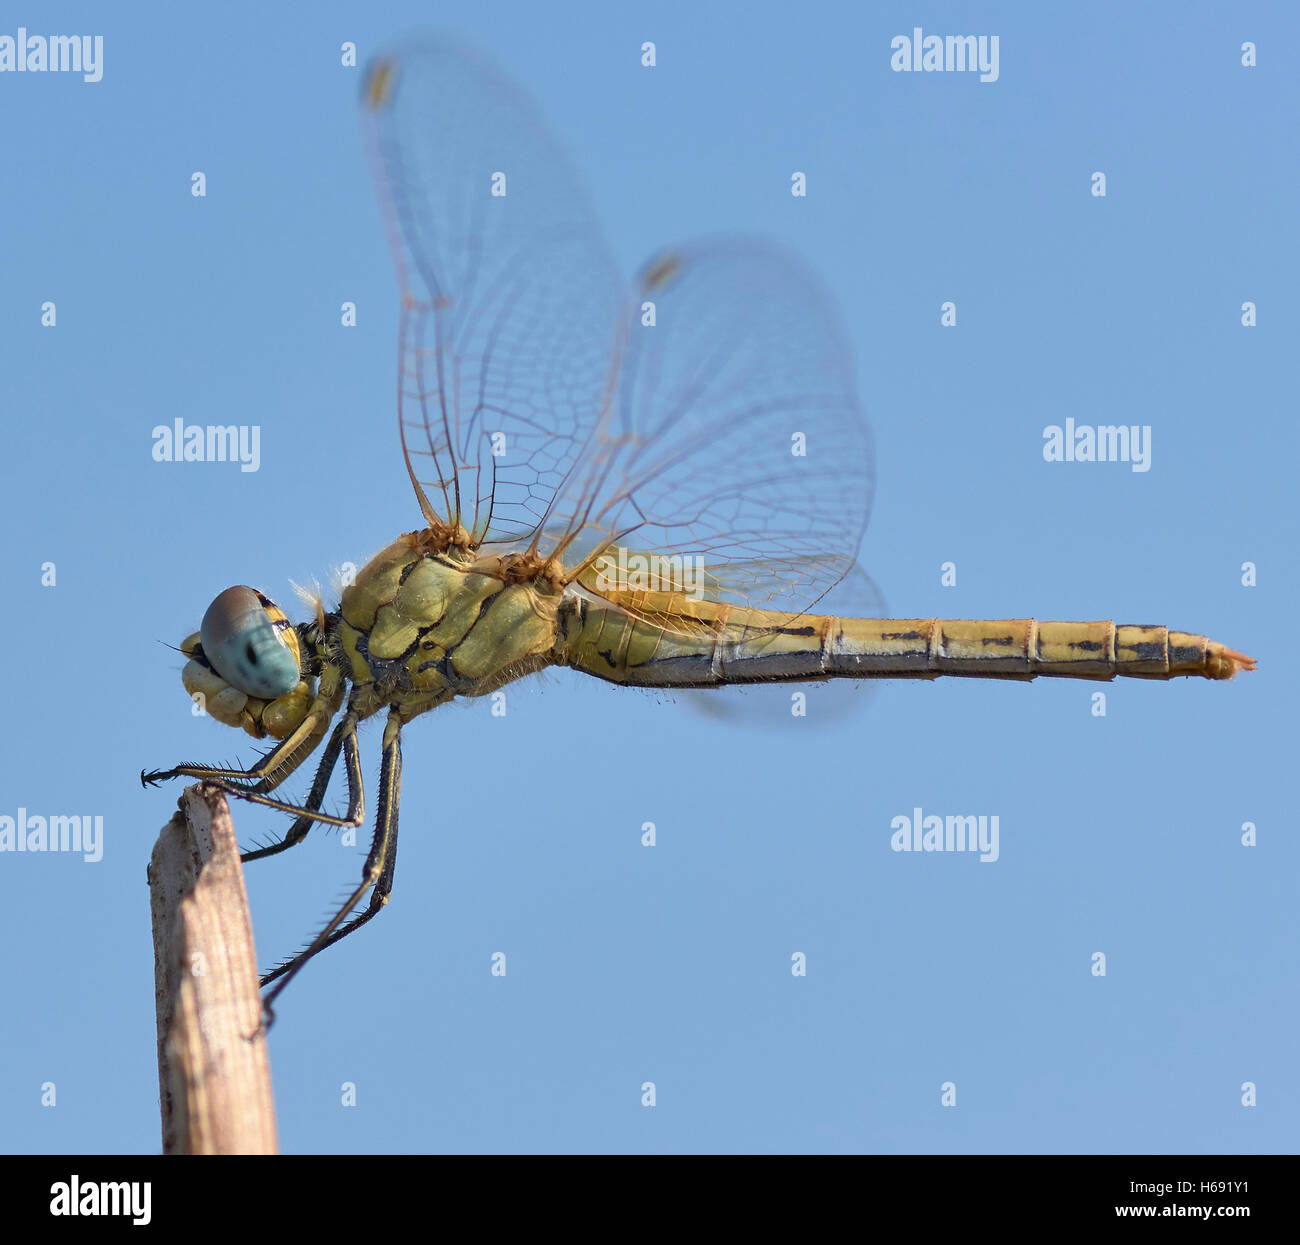 Sympetrum fonscolombii. Female dragonfly. Stock Photo